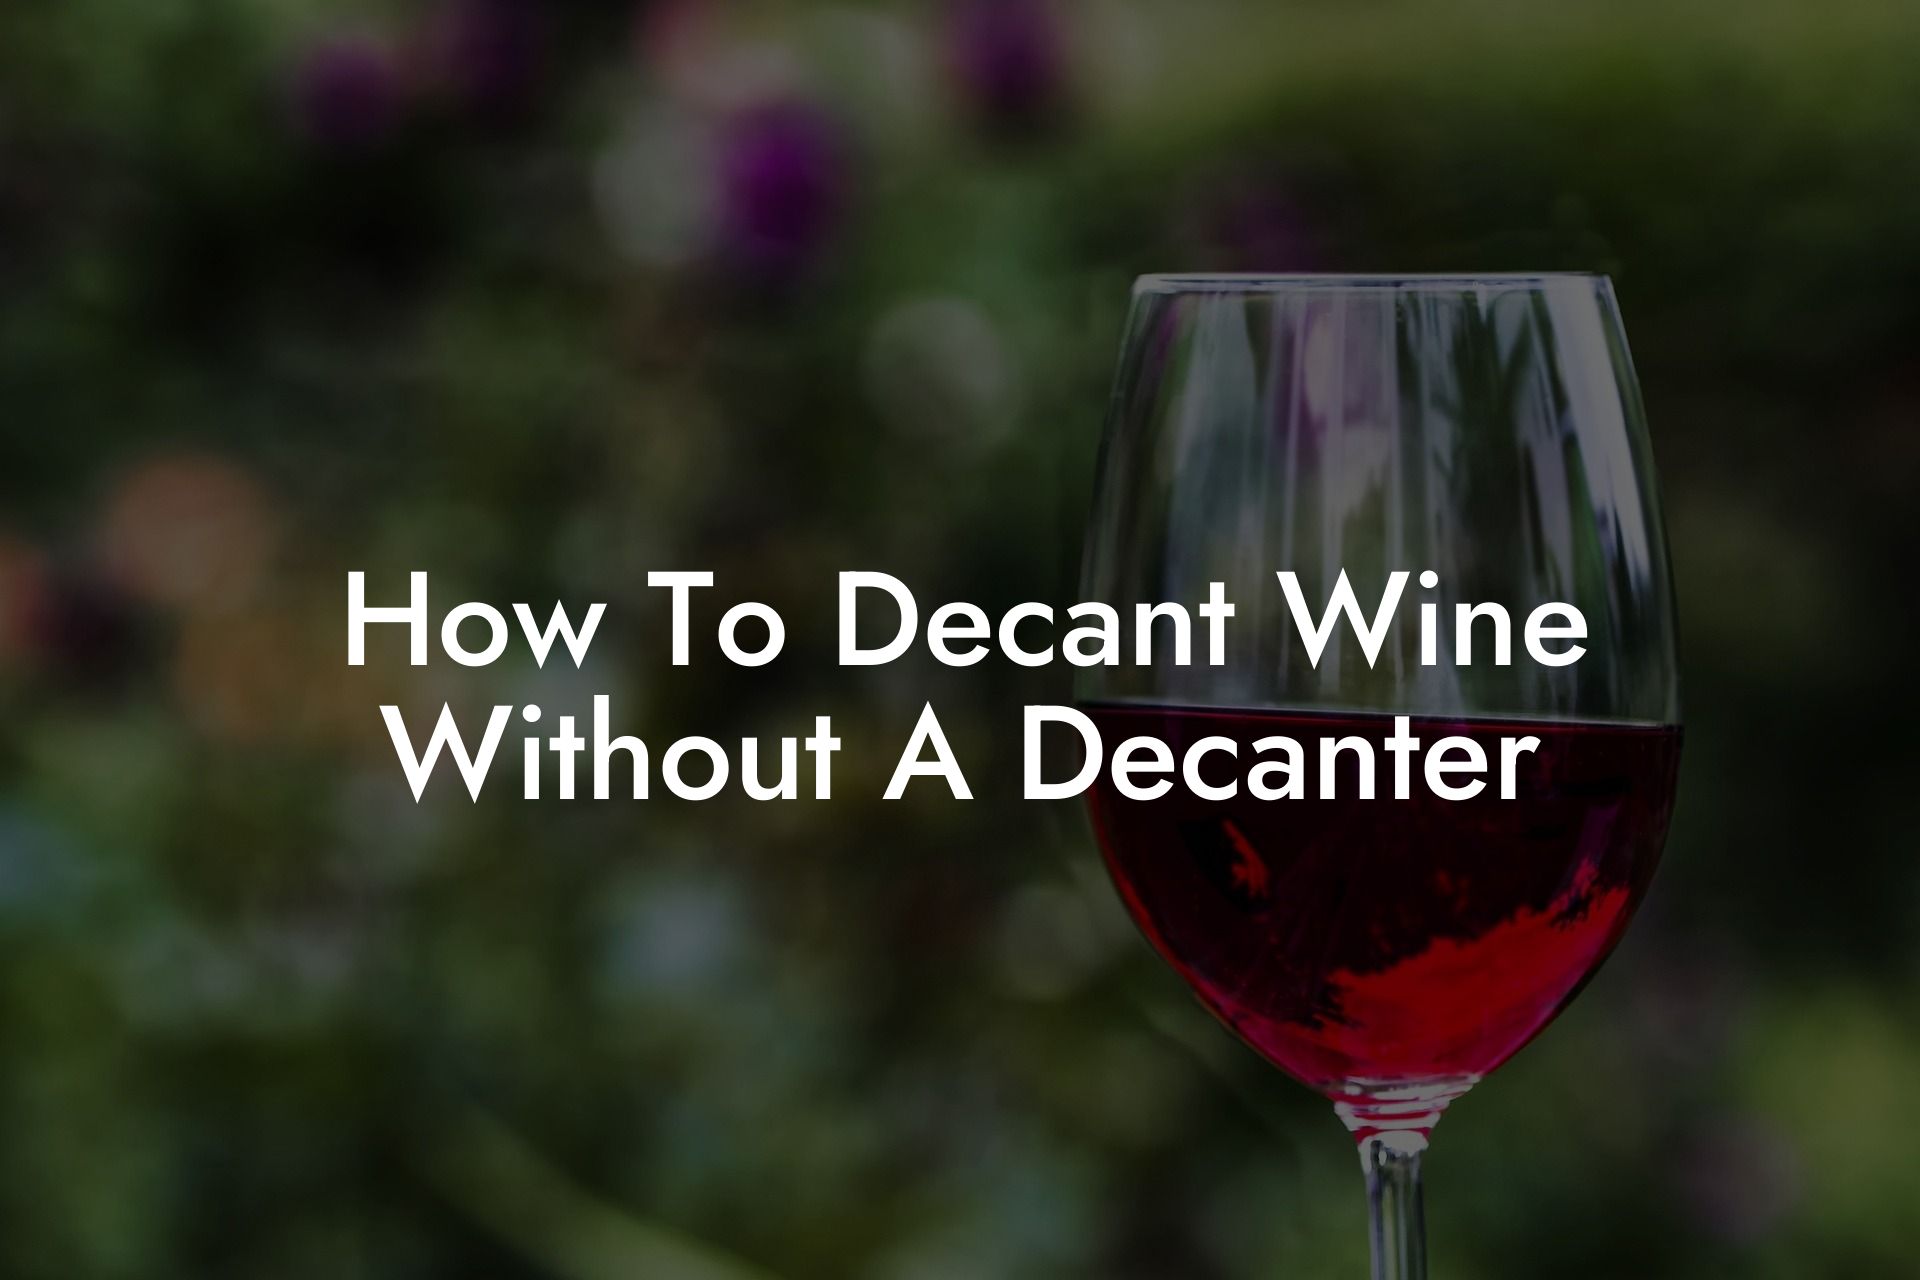 How To Decant Wine Without A Decanter